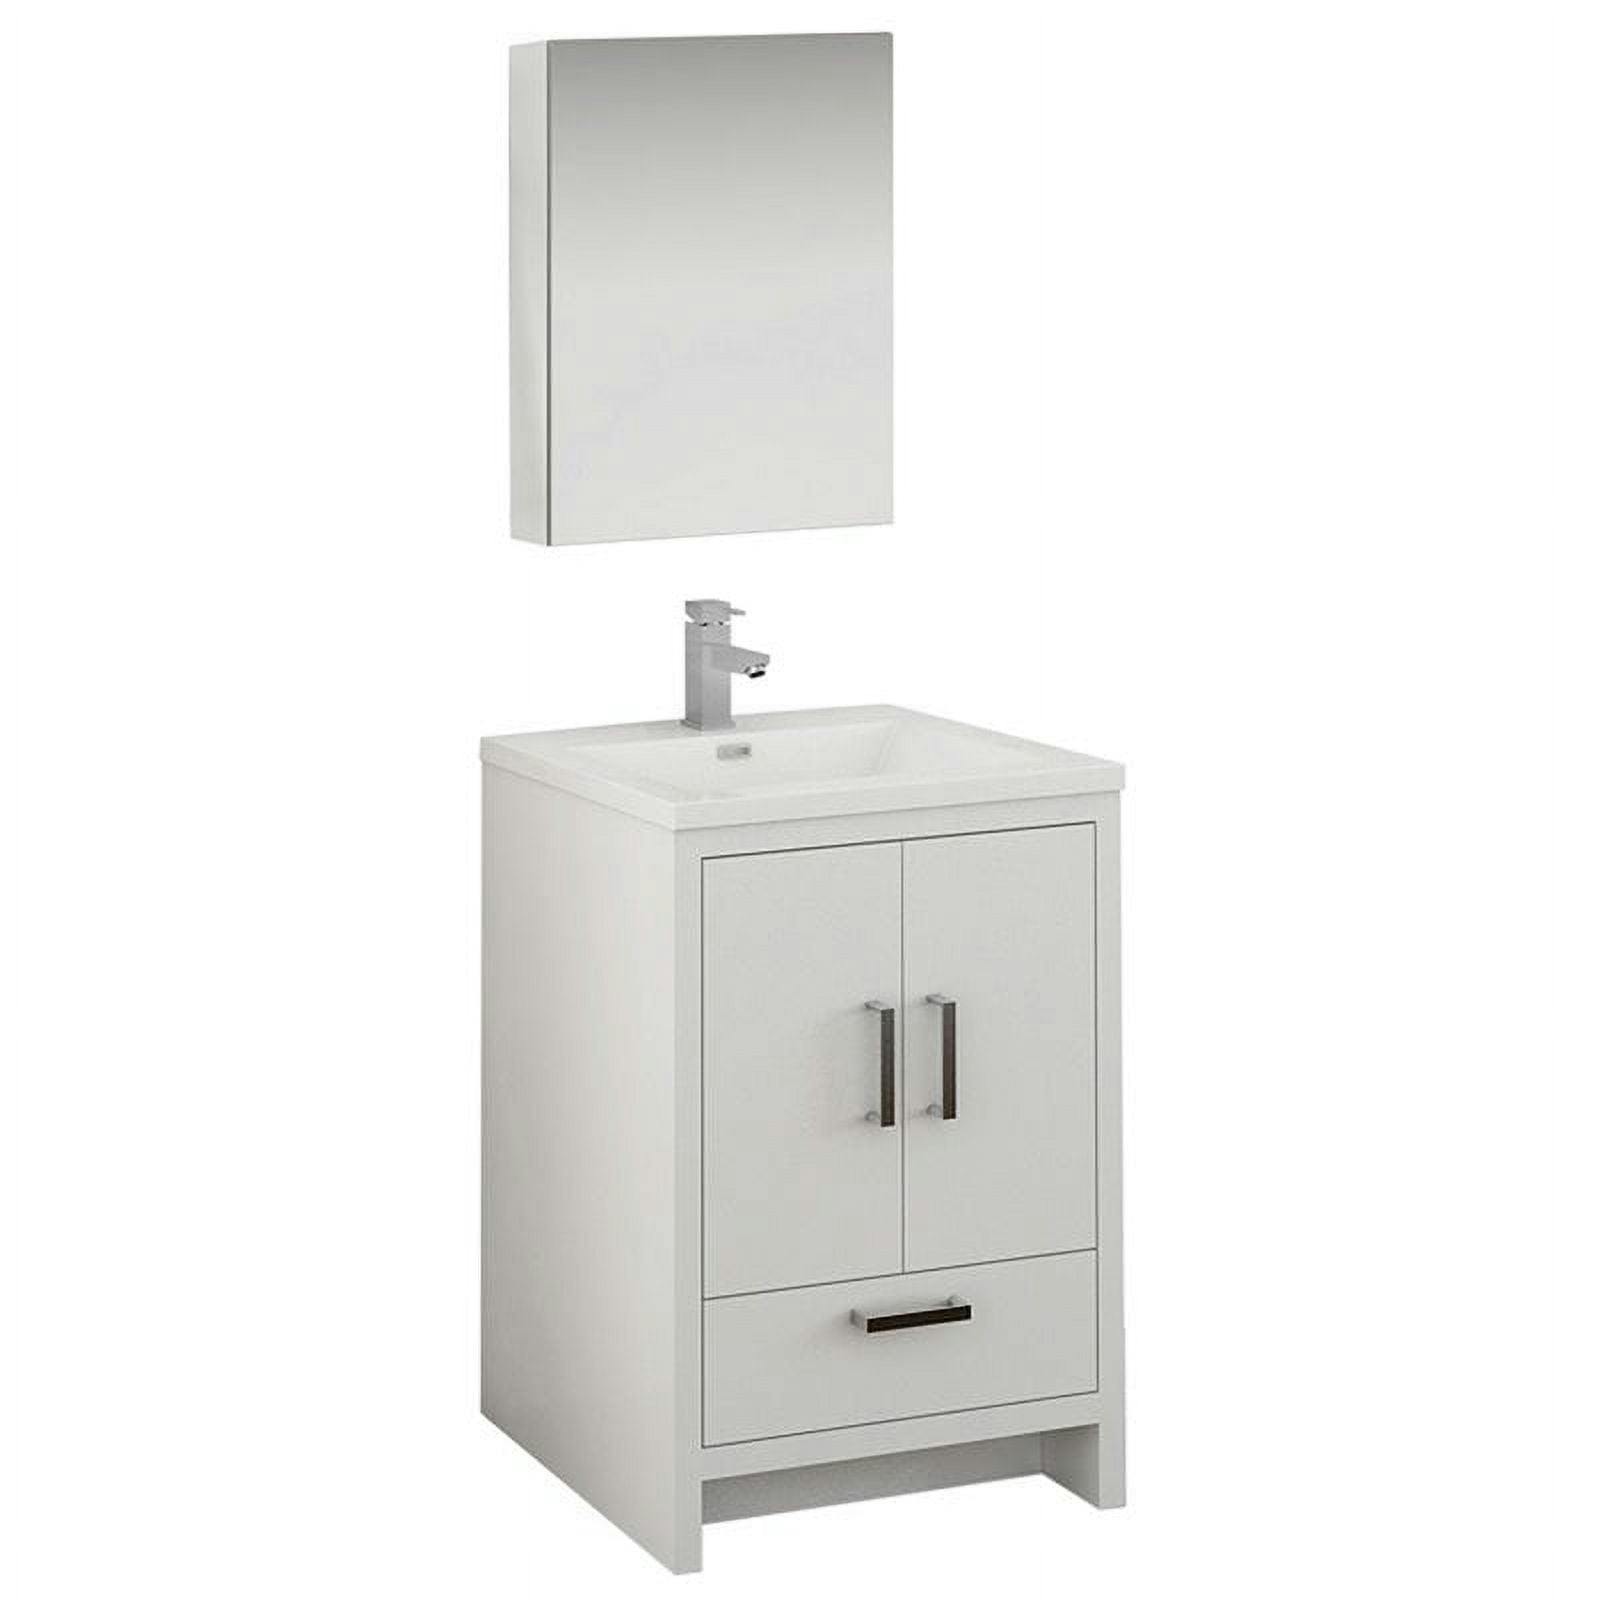 Glossy White 24" Modern Free-Standing Bathroom Vanity Set with Integrated Sink and Medicine Cabinet